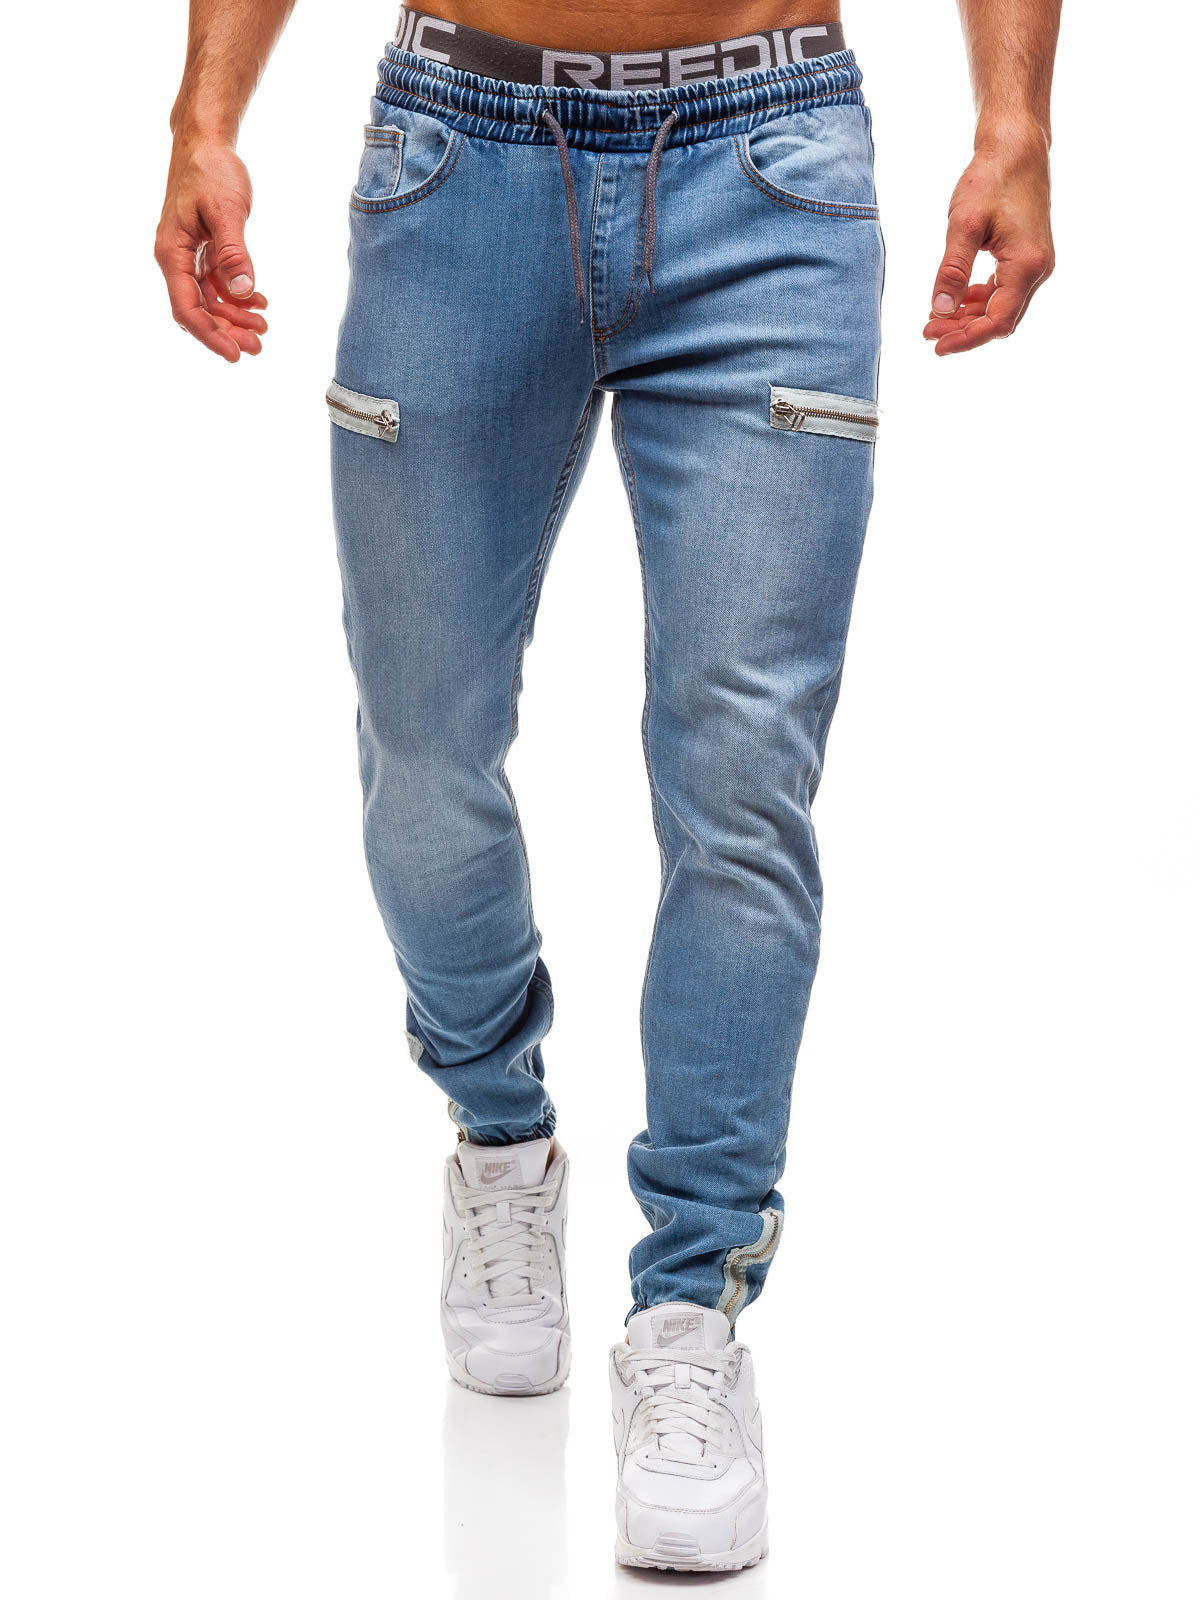 Frosted Zipper Design Casual Jeans